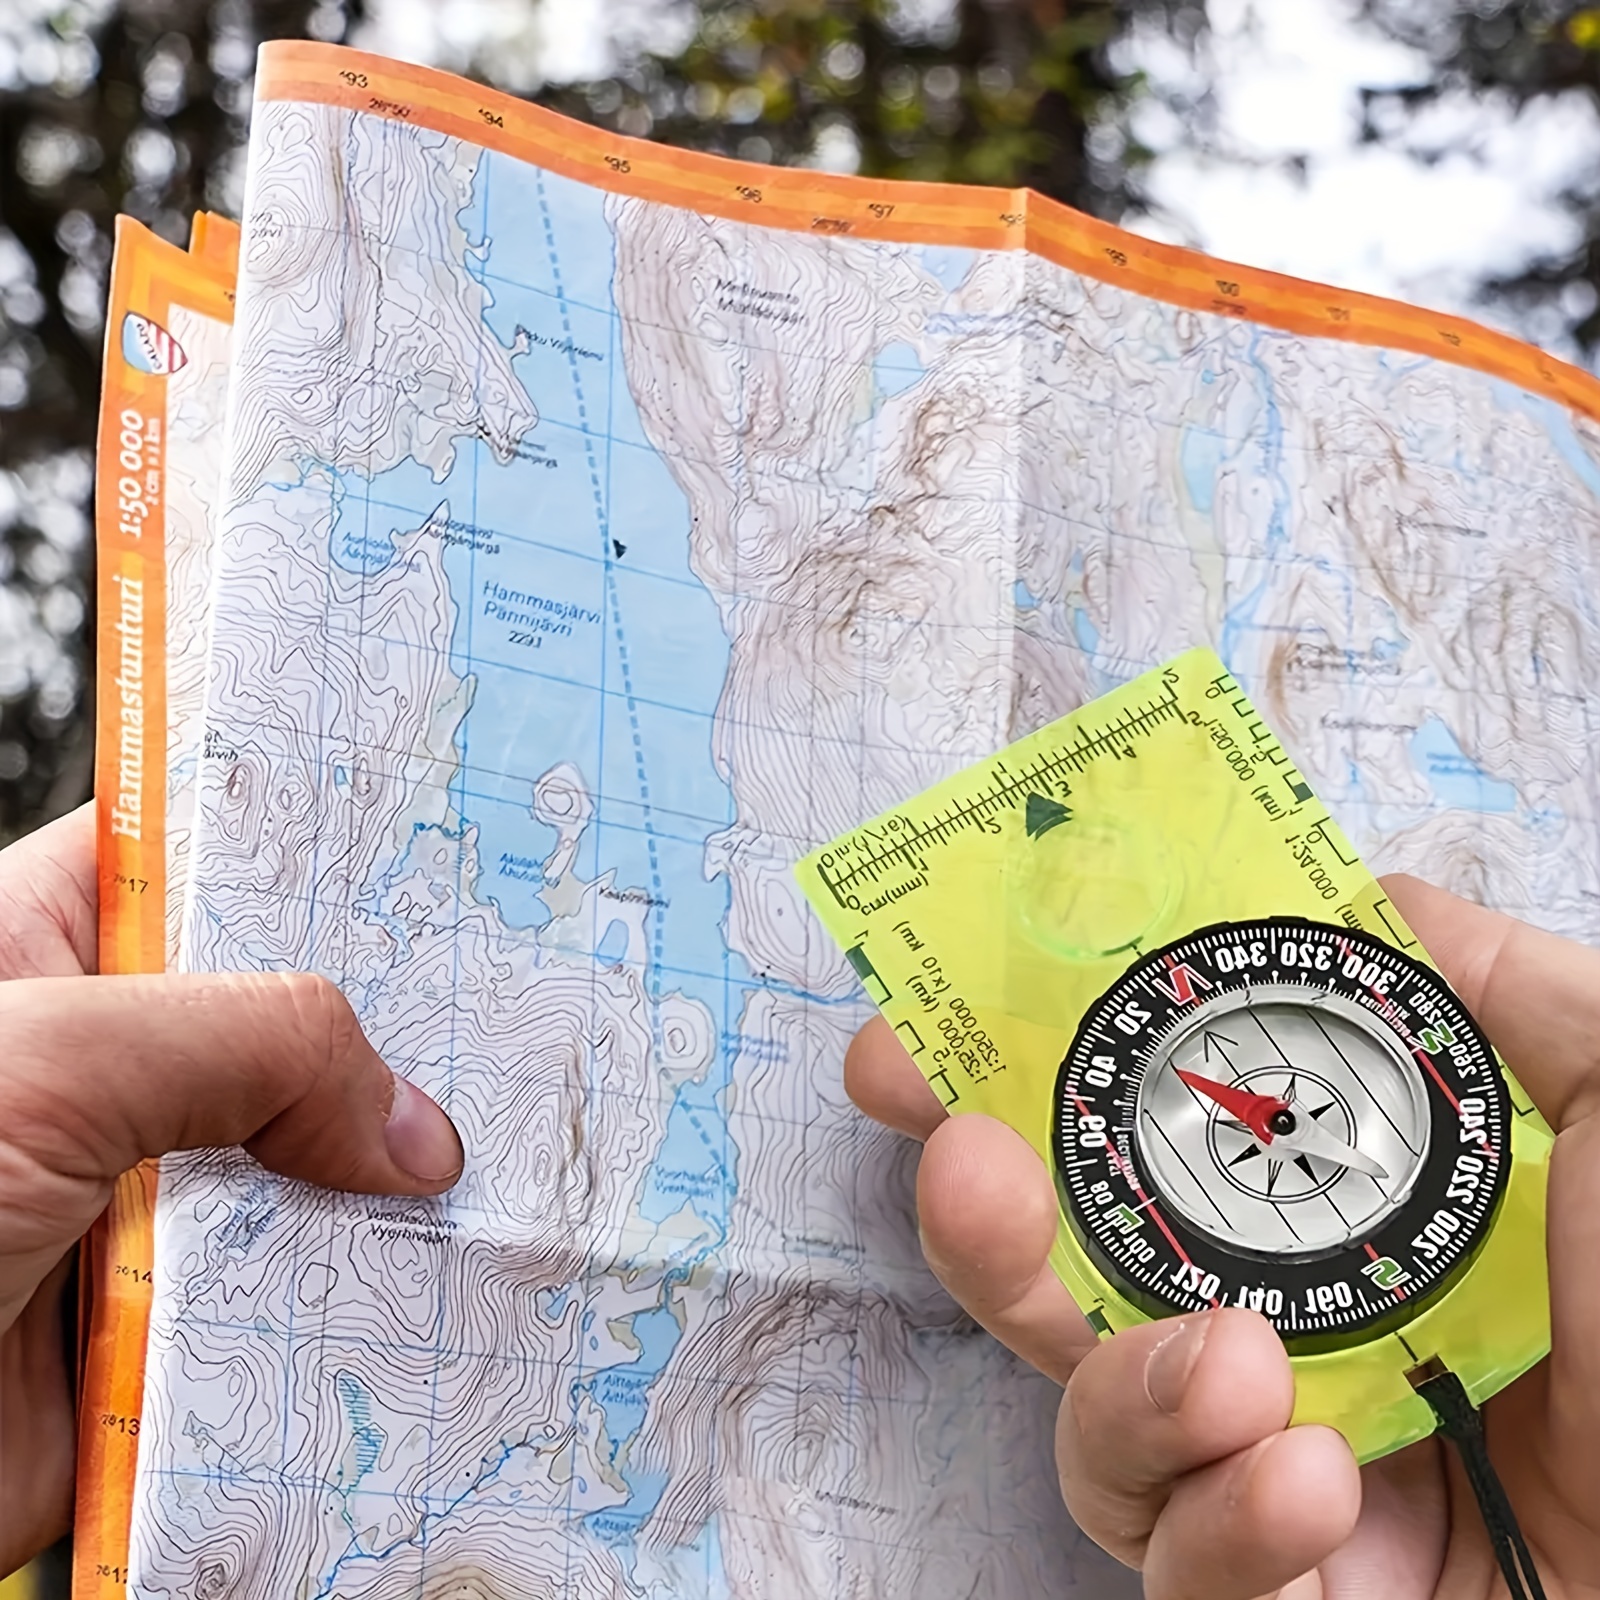 Portable Compass With Ruler Scale For Scout Hiking Camping Boating;  Orienteering Map; Professional Magnifying Compass